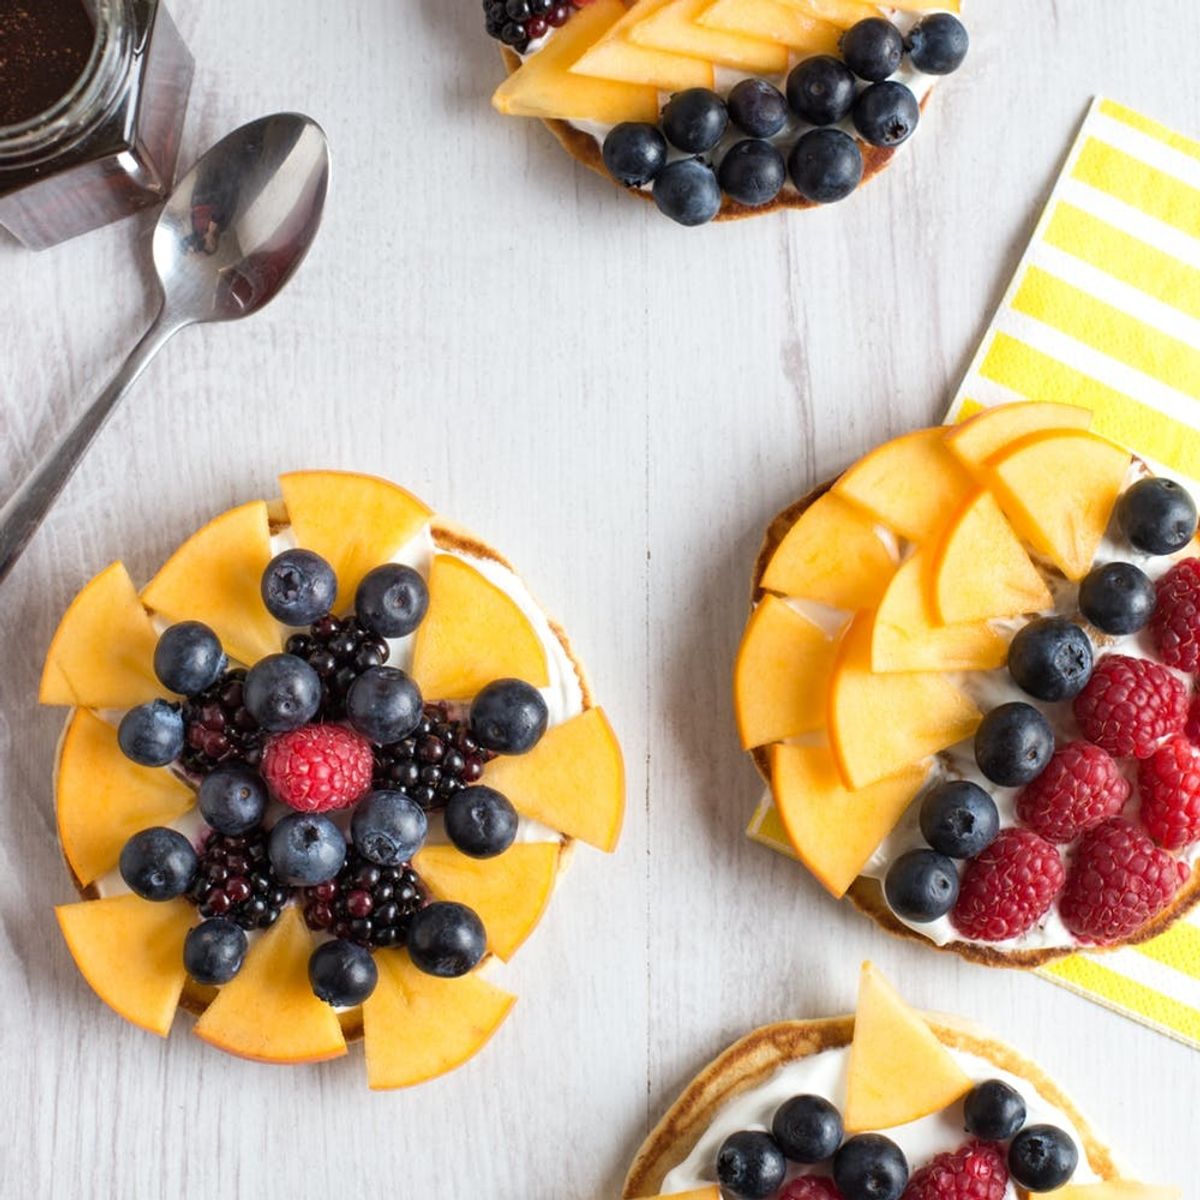 Make Your Breakfast More Beautiful With These Pancake Fruit Tarts!